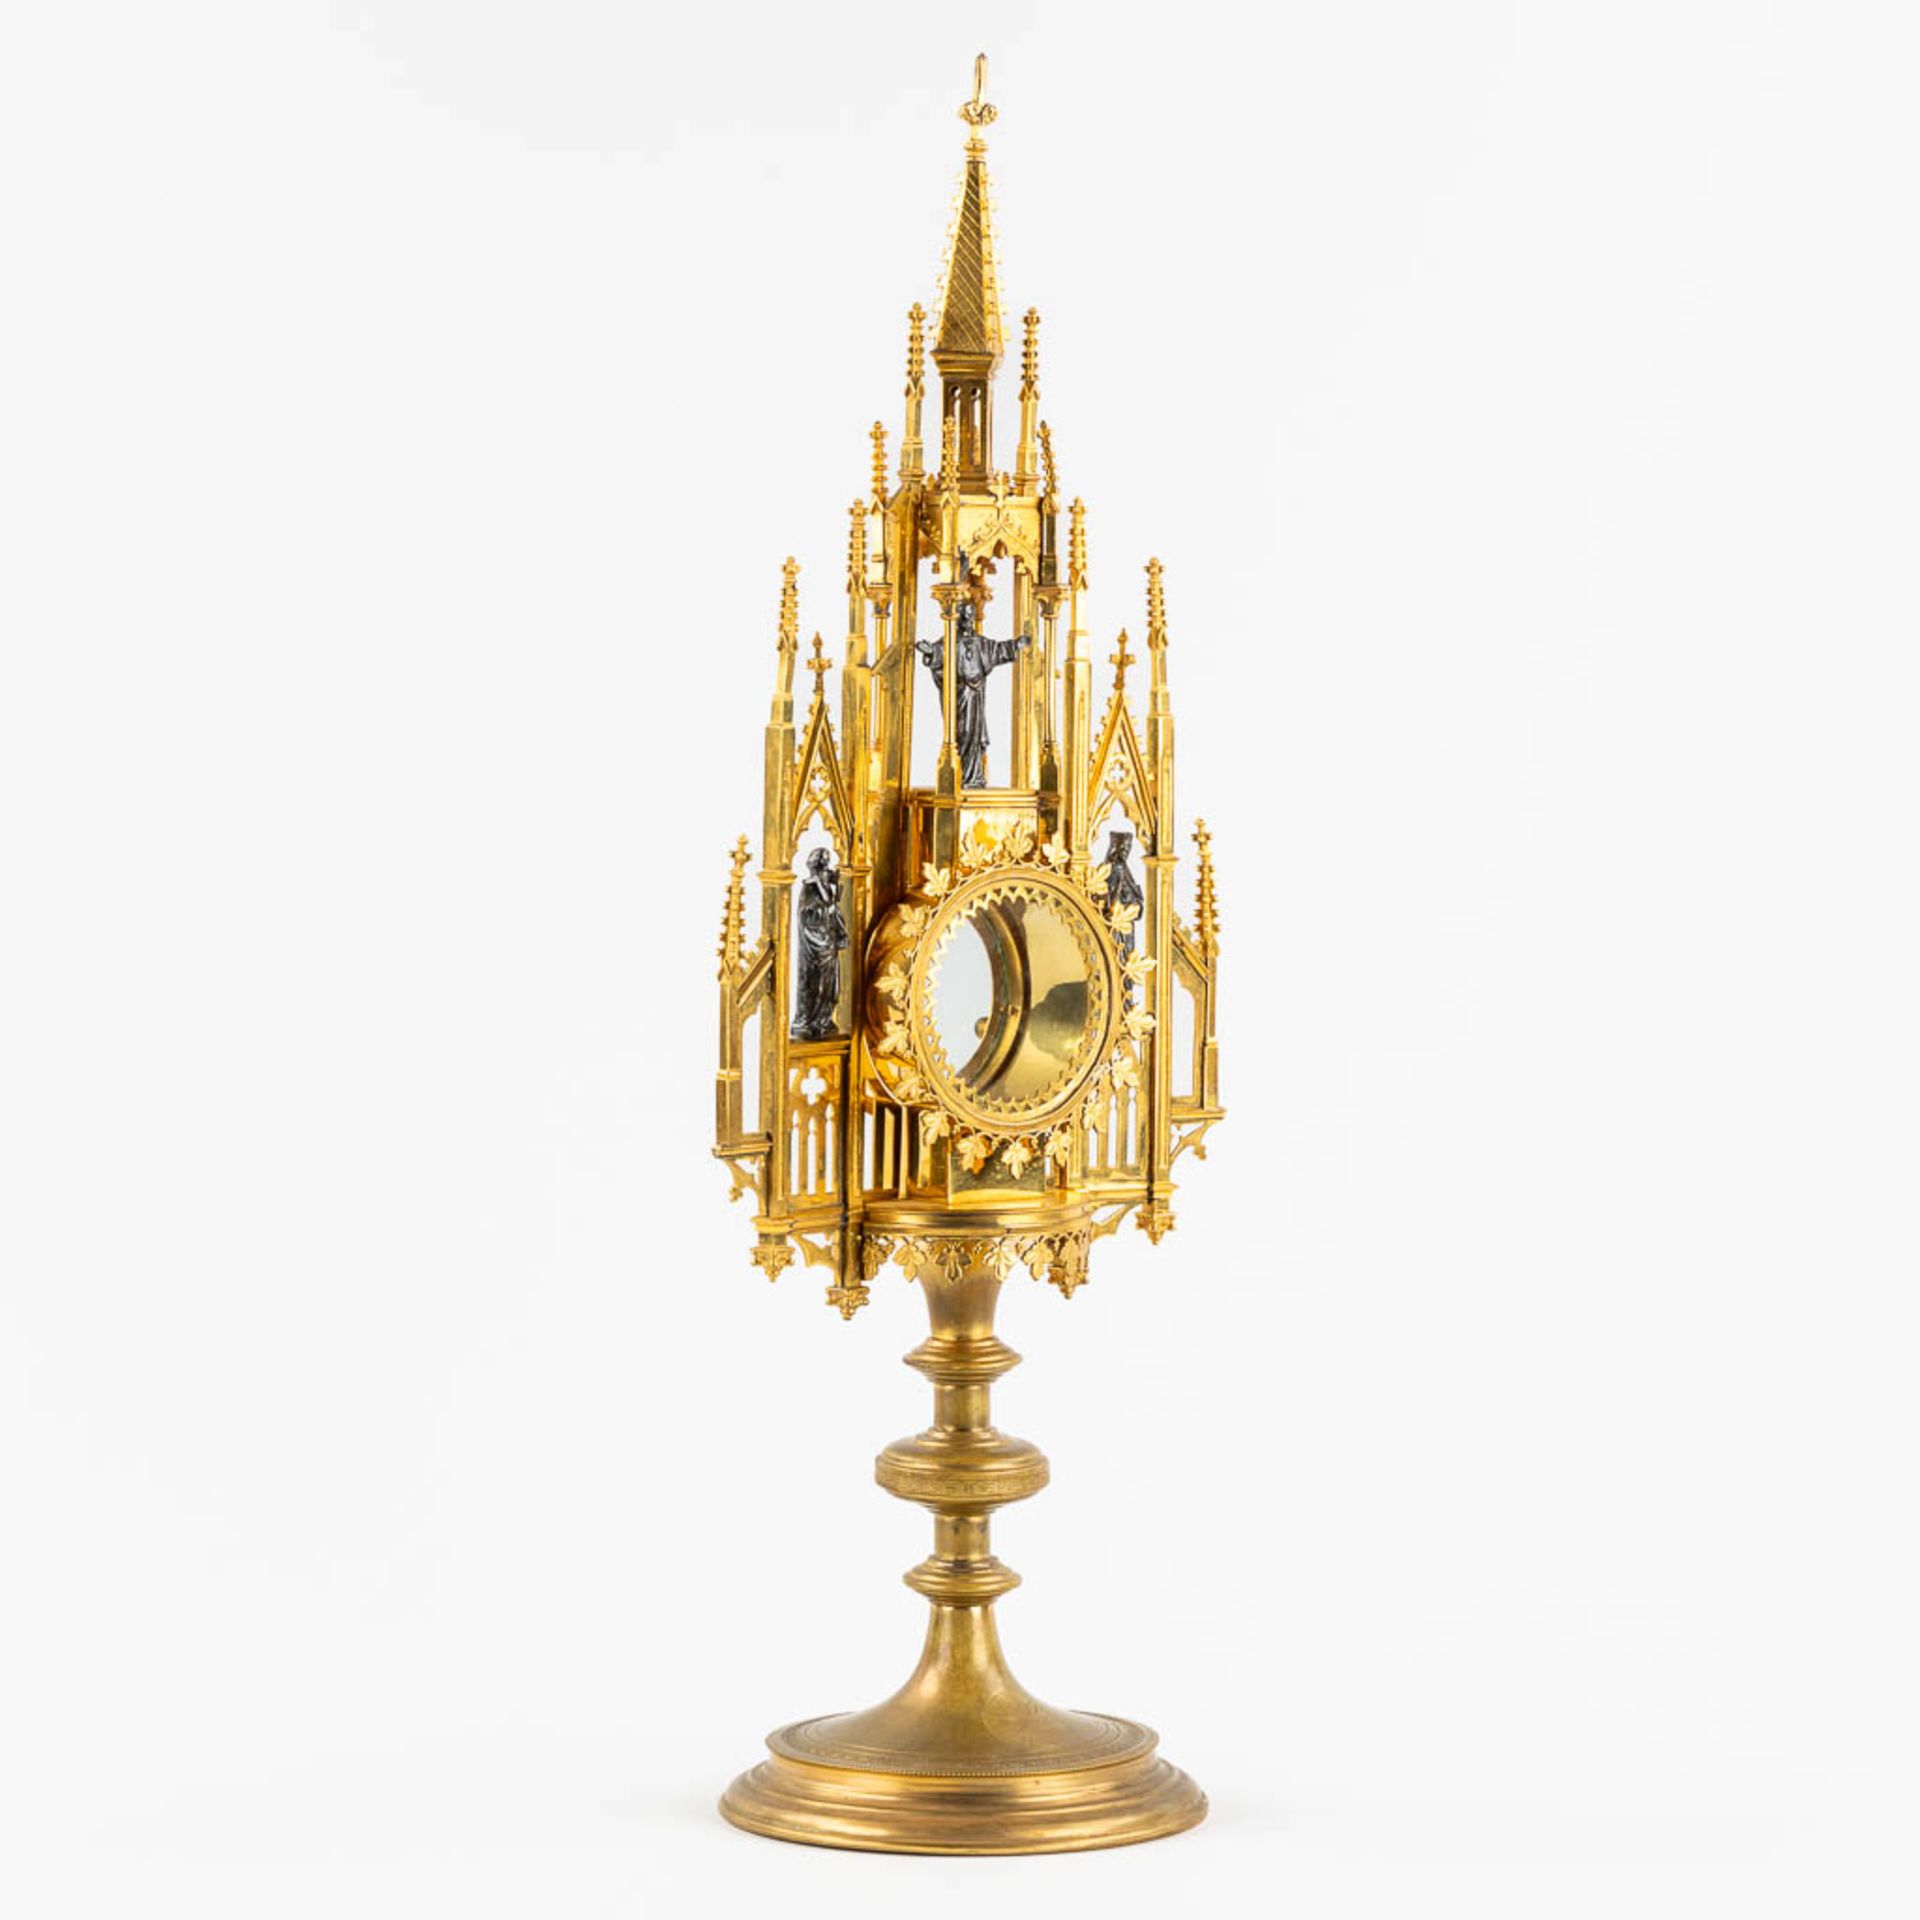 A Tower monstrance, gilt and silver plated brass, Gothic Revival. 19th C. (W:21,5 x H:58 cm) - Bild 9 aus 22